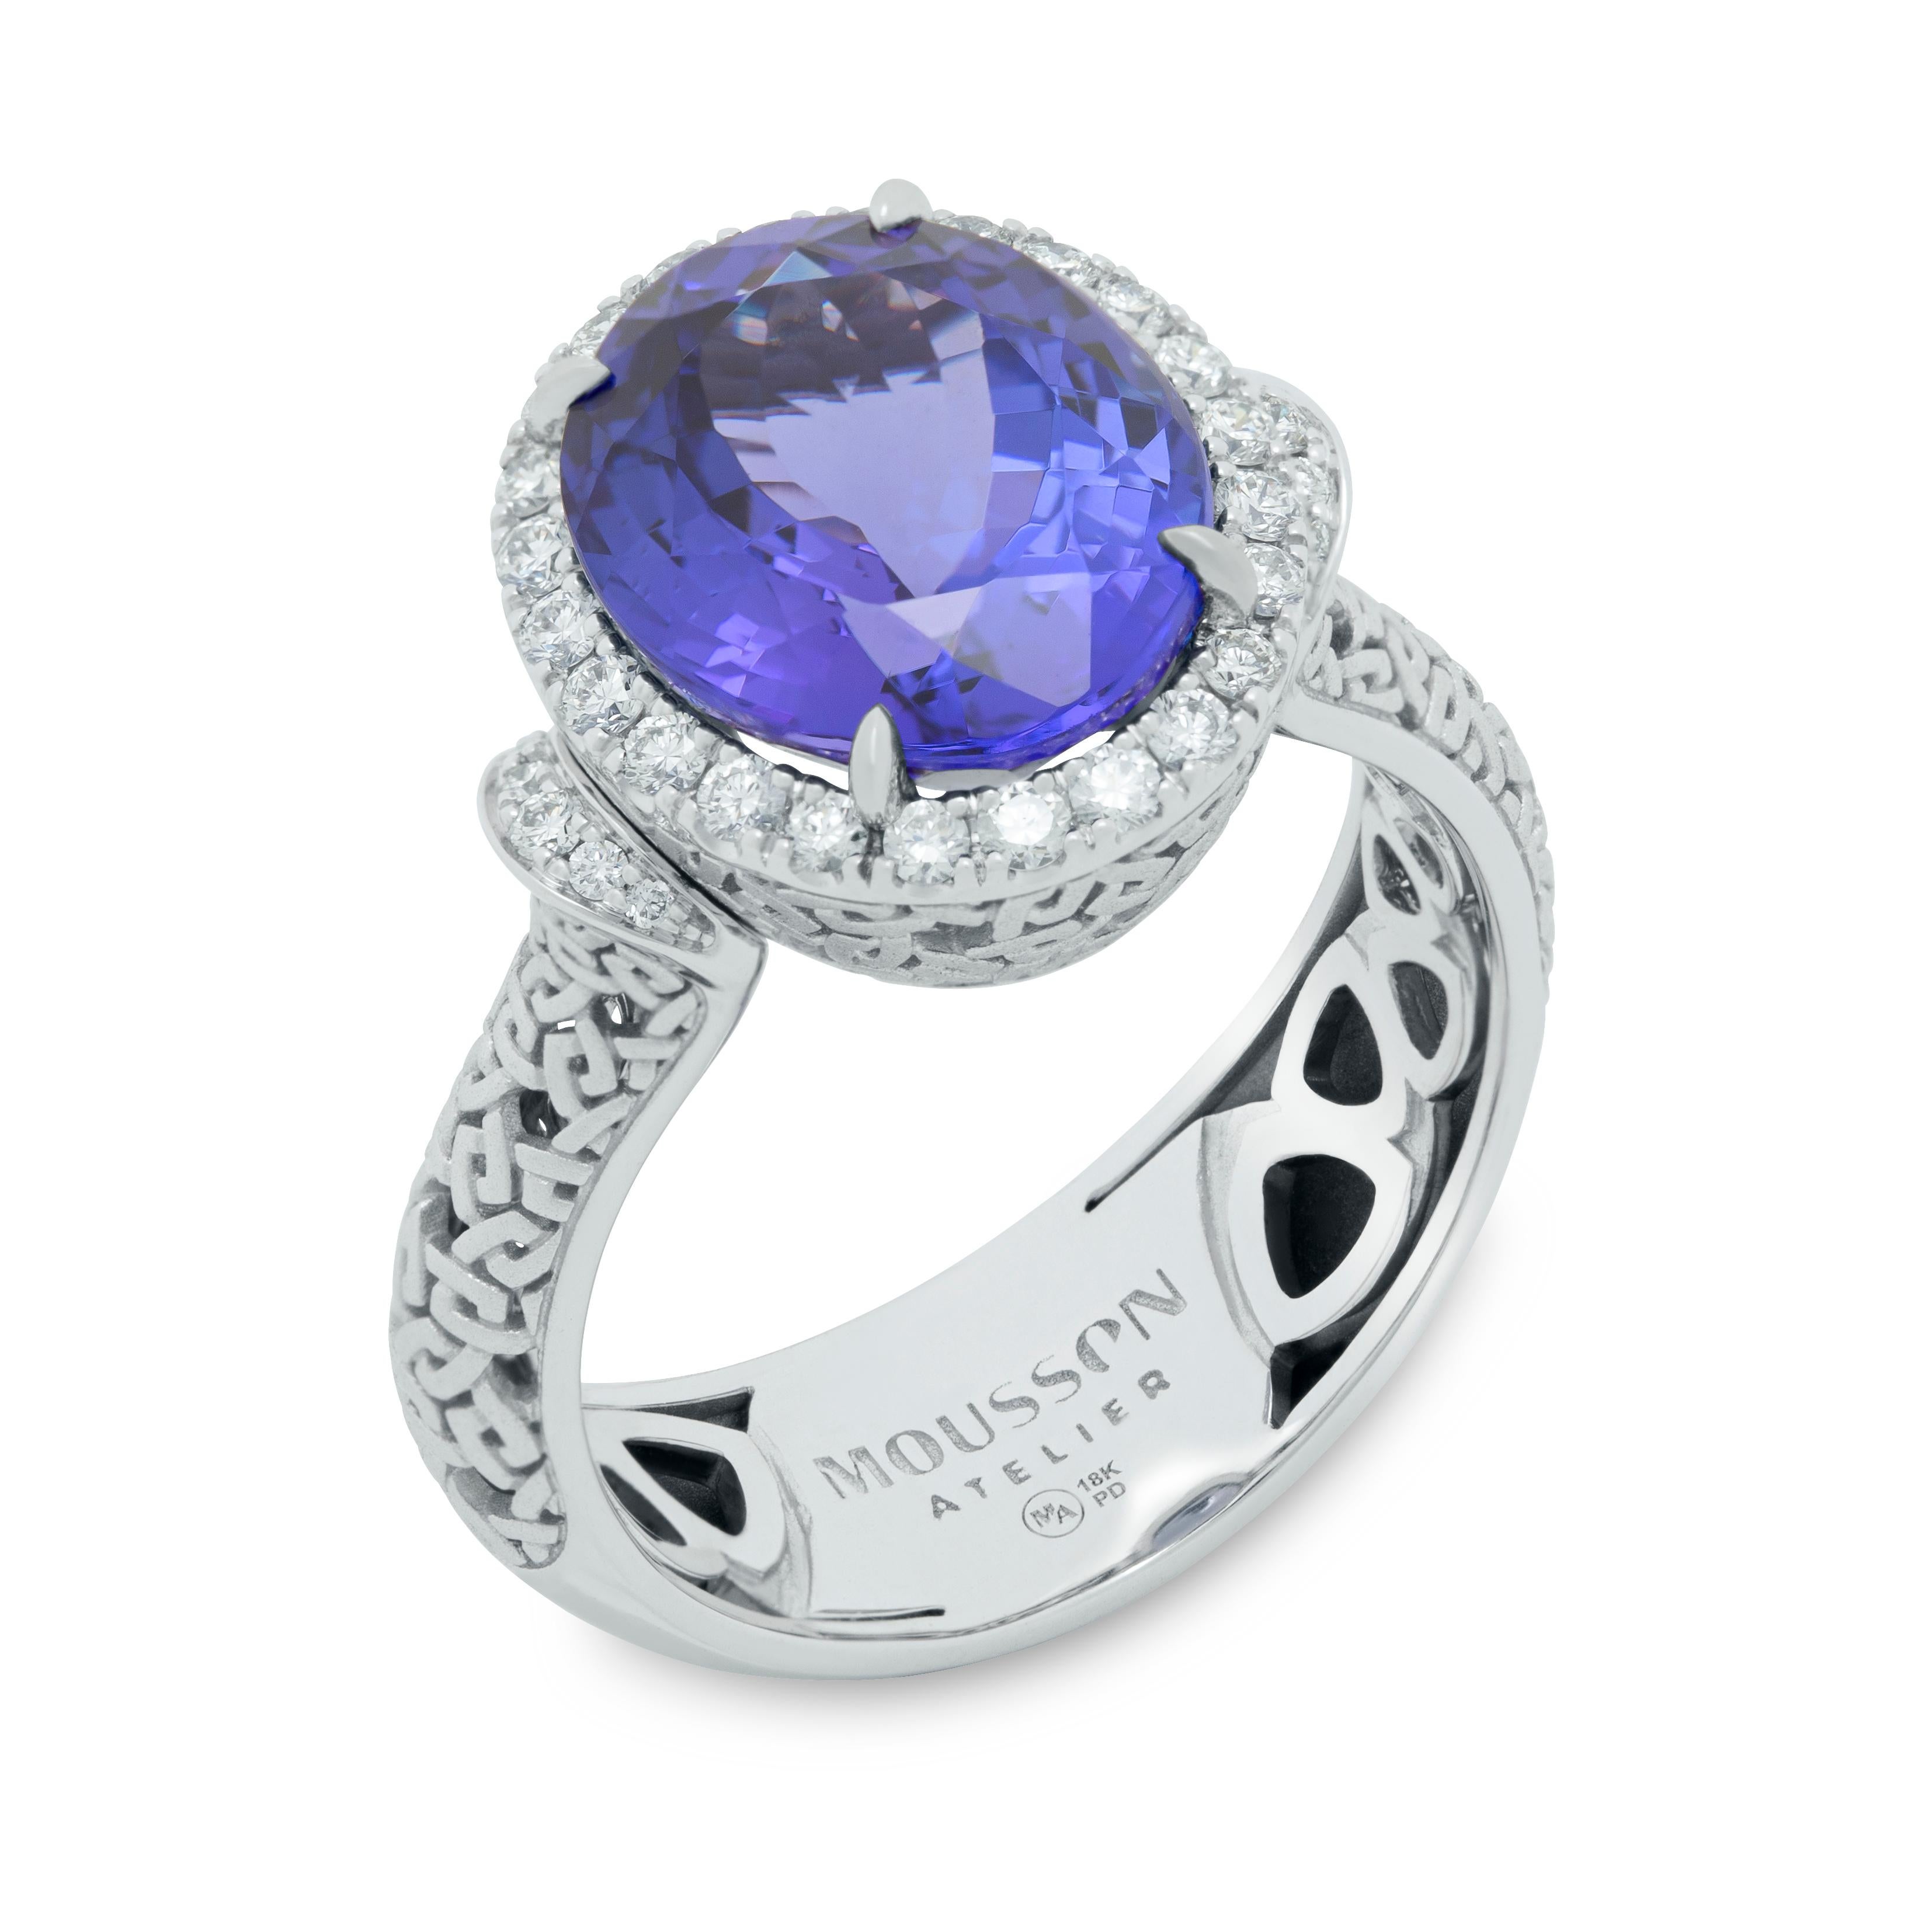 Tanzanite 5.48 Carat Diamonds 18 Karat White Gold New Classic Ring
Introducing a Ring crafted from delicate 18 Karat White Gold, which in a trio with 5.48 Carat Tanzanite and 34 Diamonds around it, creates a truly noble look. But the main detail